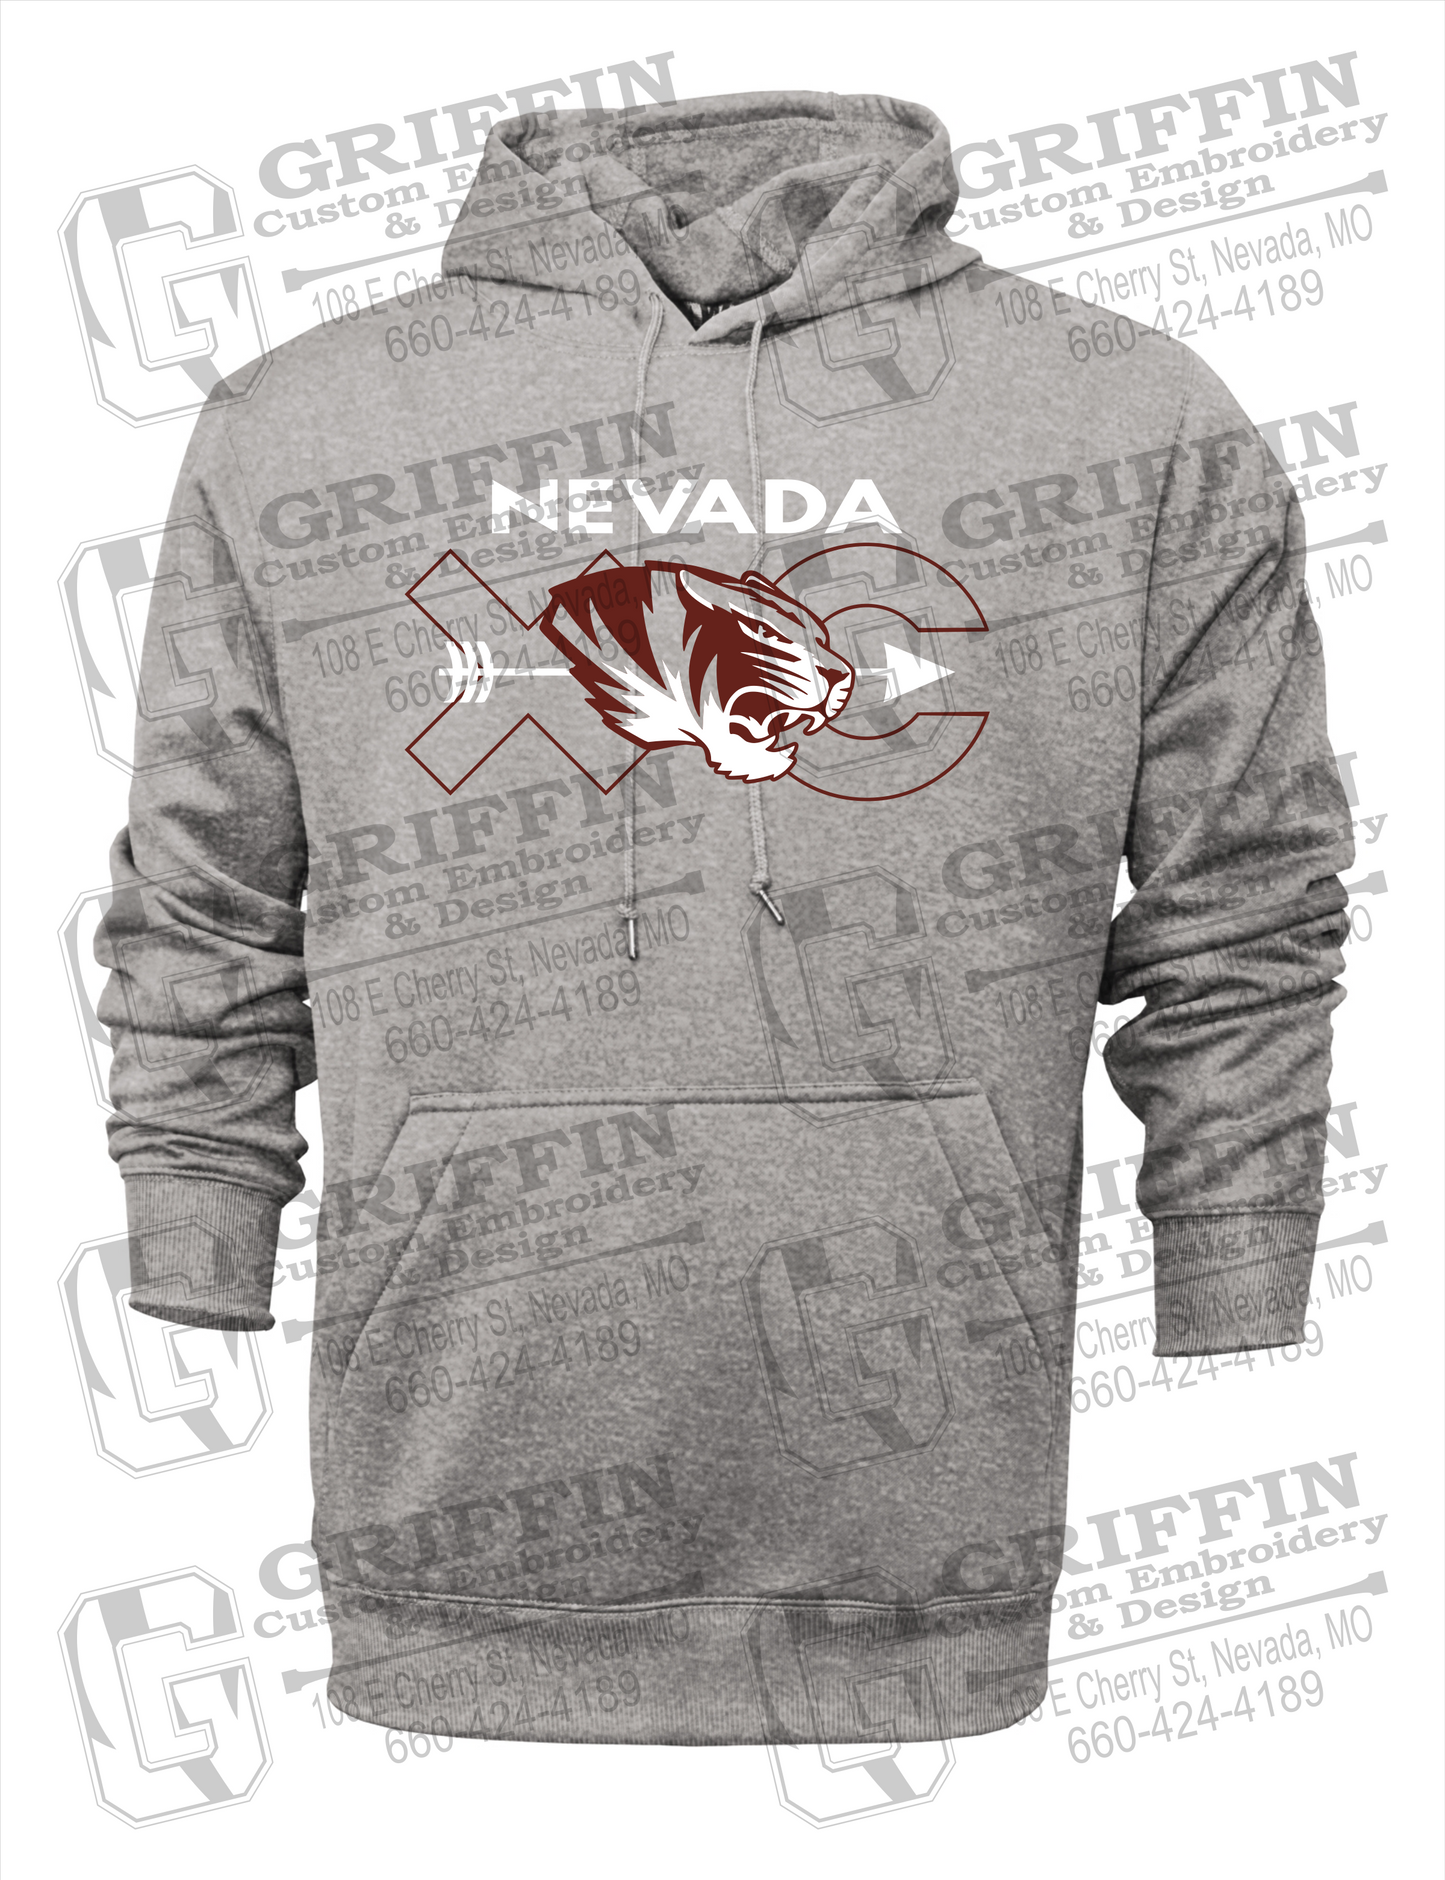 Nevada Tigers 23-T Hoodie - Cross Country